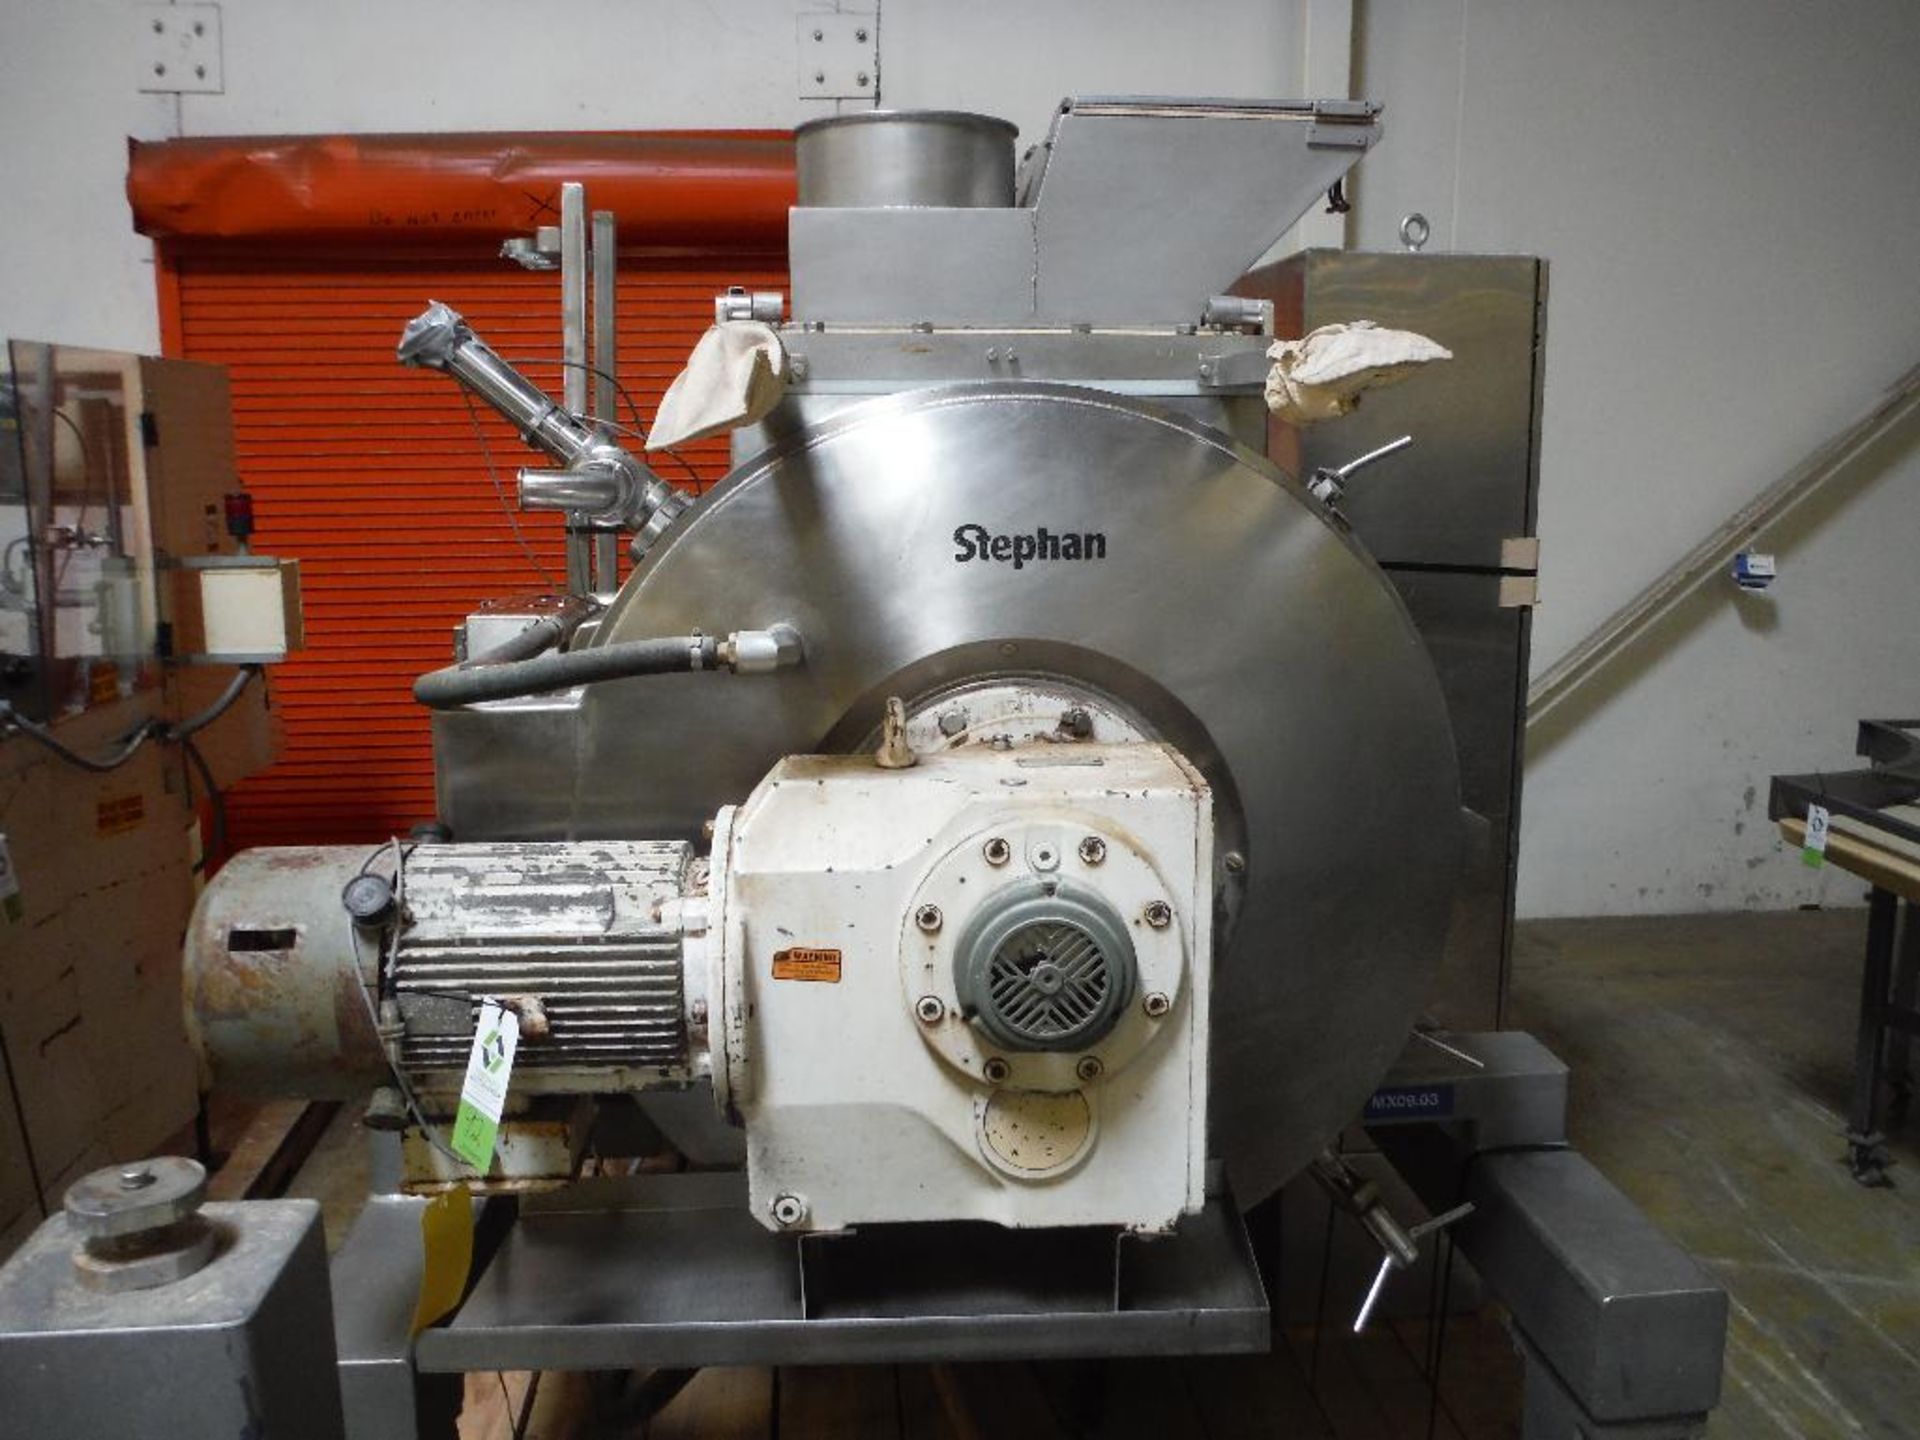 Stephan high speed jacketed mixer, Model TK_600, SN 714583, 43 in. bowl diameter x 26 in. deep, with - Image 3 of 29